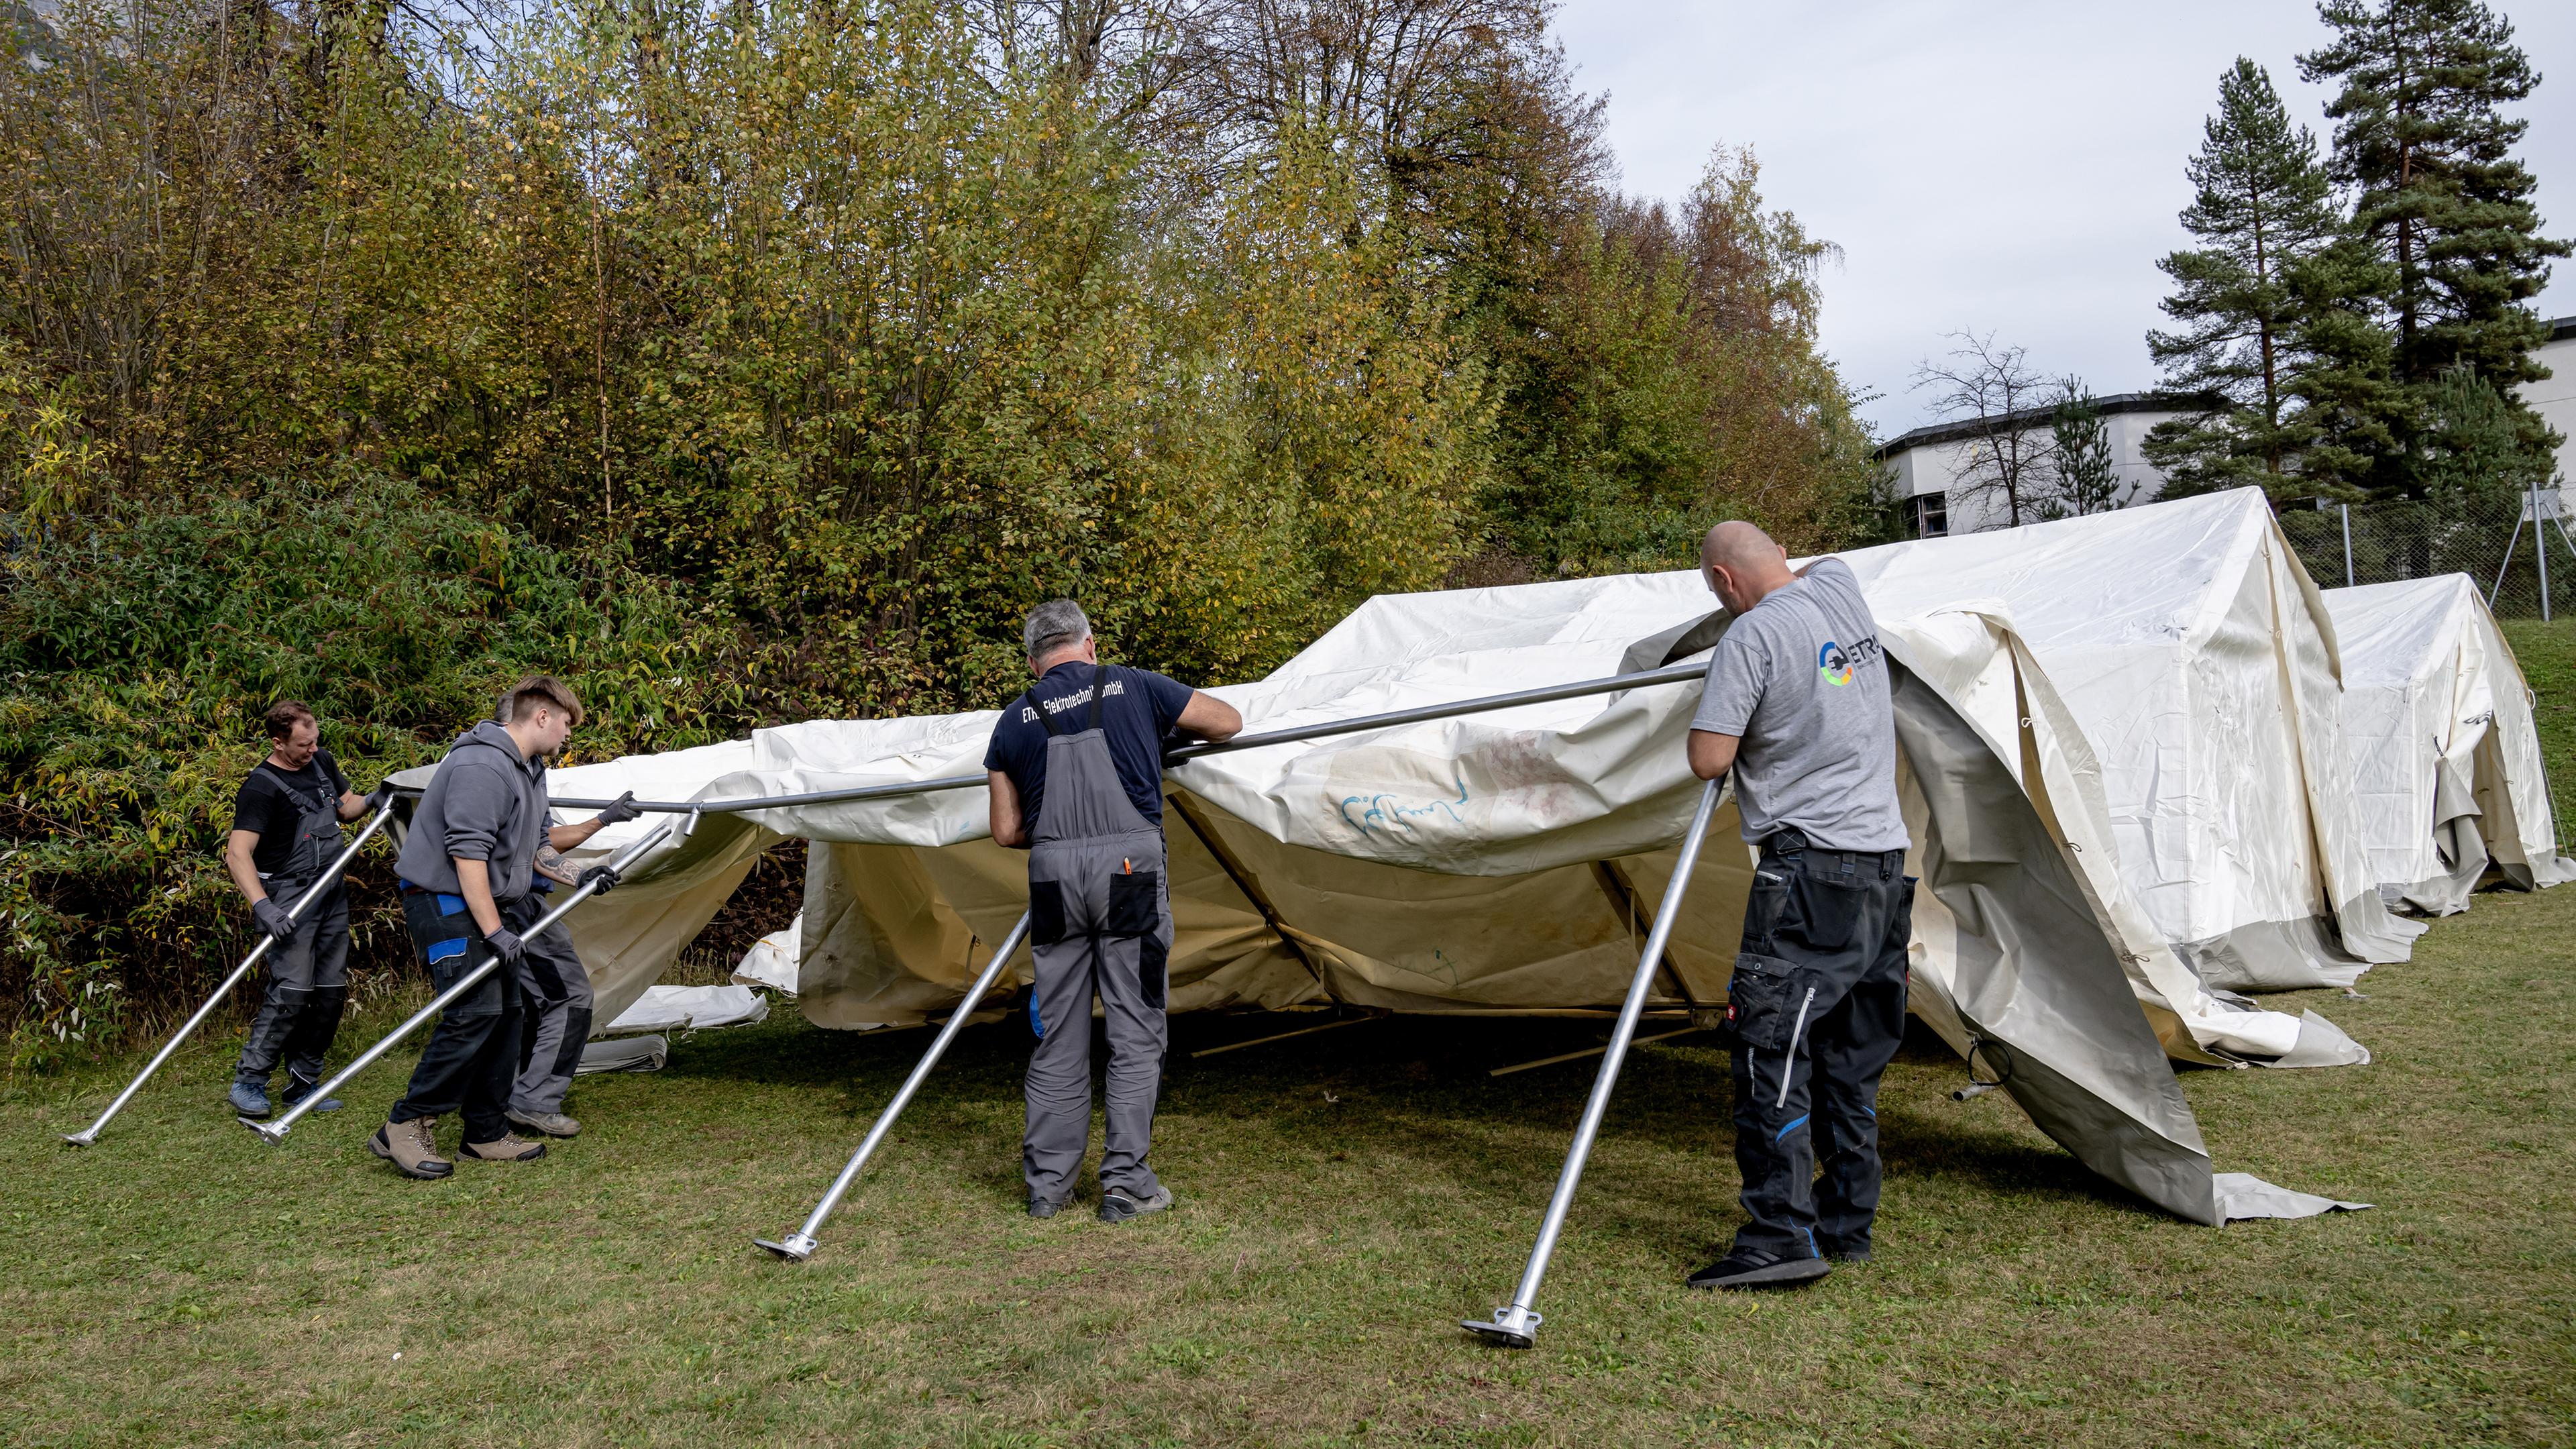 Tents as temporary reception center for migrants